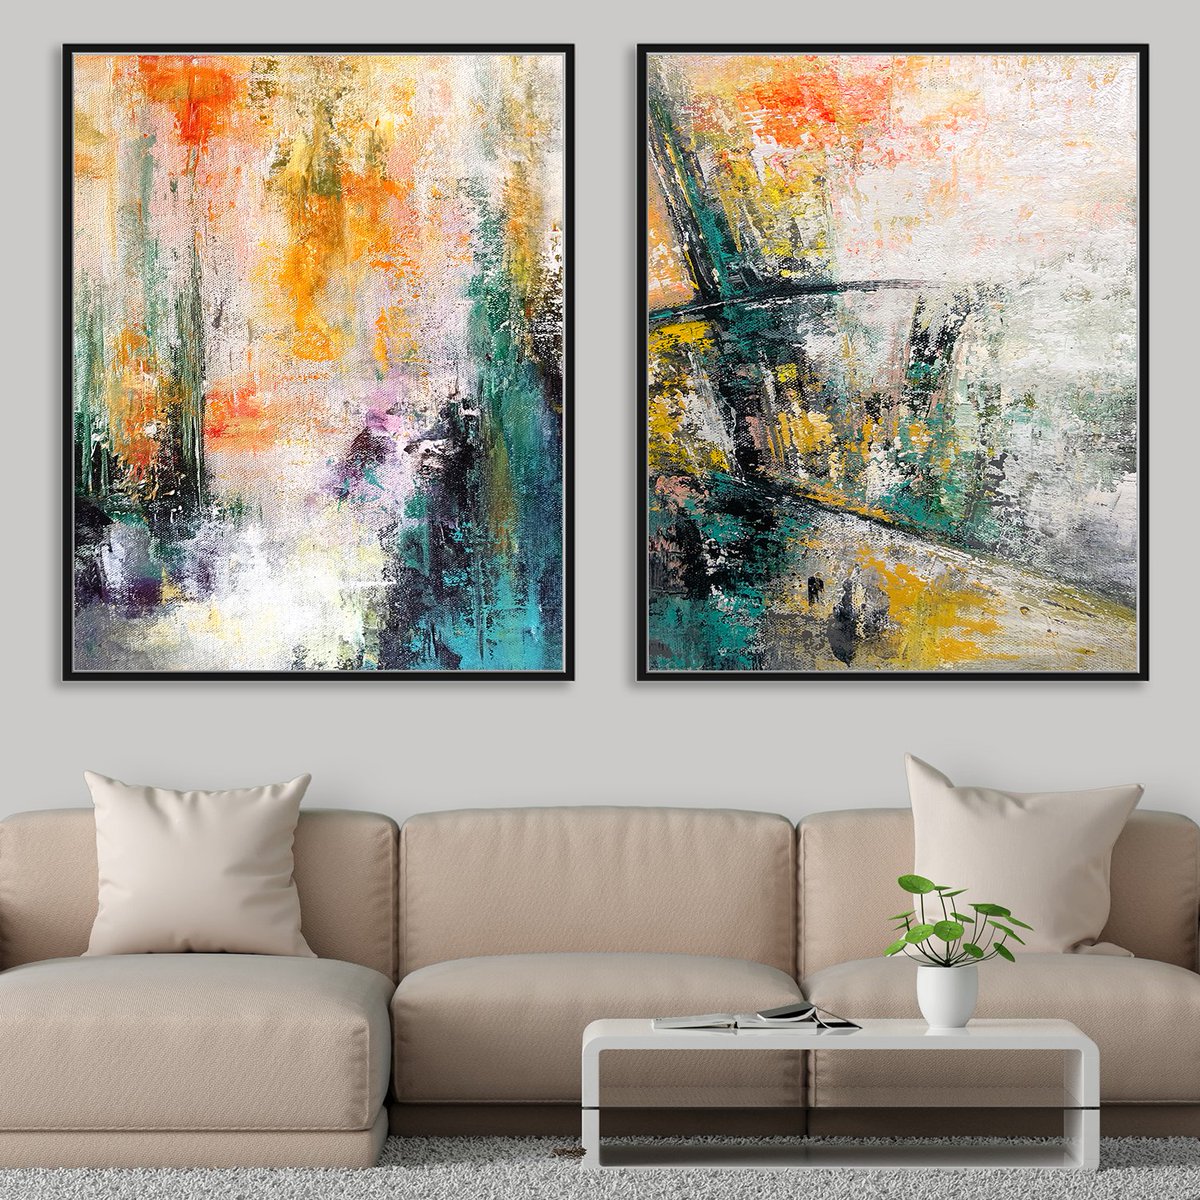 A set of two abstract art pieces on canvas with a modern design featuring orange and green acrylic colors
FREE Global Shipping Available, Purchase Here
krivaarthouse.etsy.com/uk/listing/129…

#modernart #orangepainting🧡 #HomeDecor #abstractpainting #acrylicart #ArtistOnTwitter #artgallery